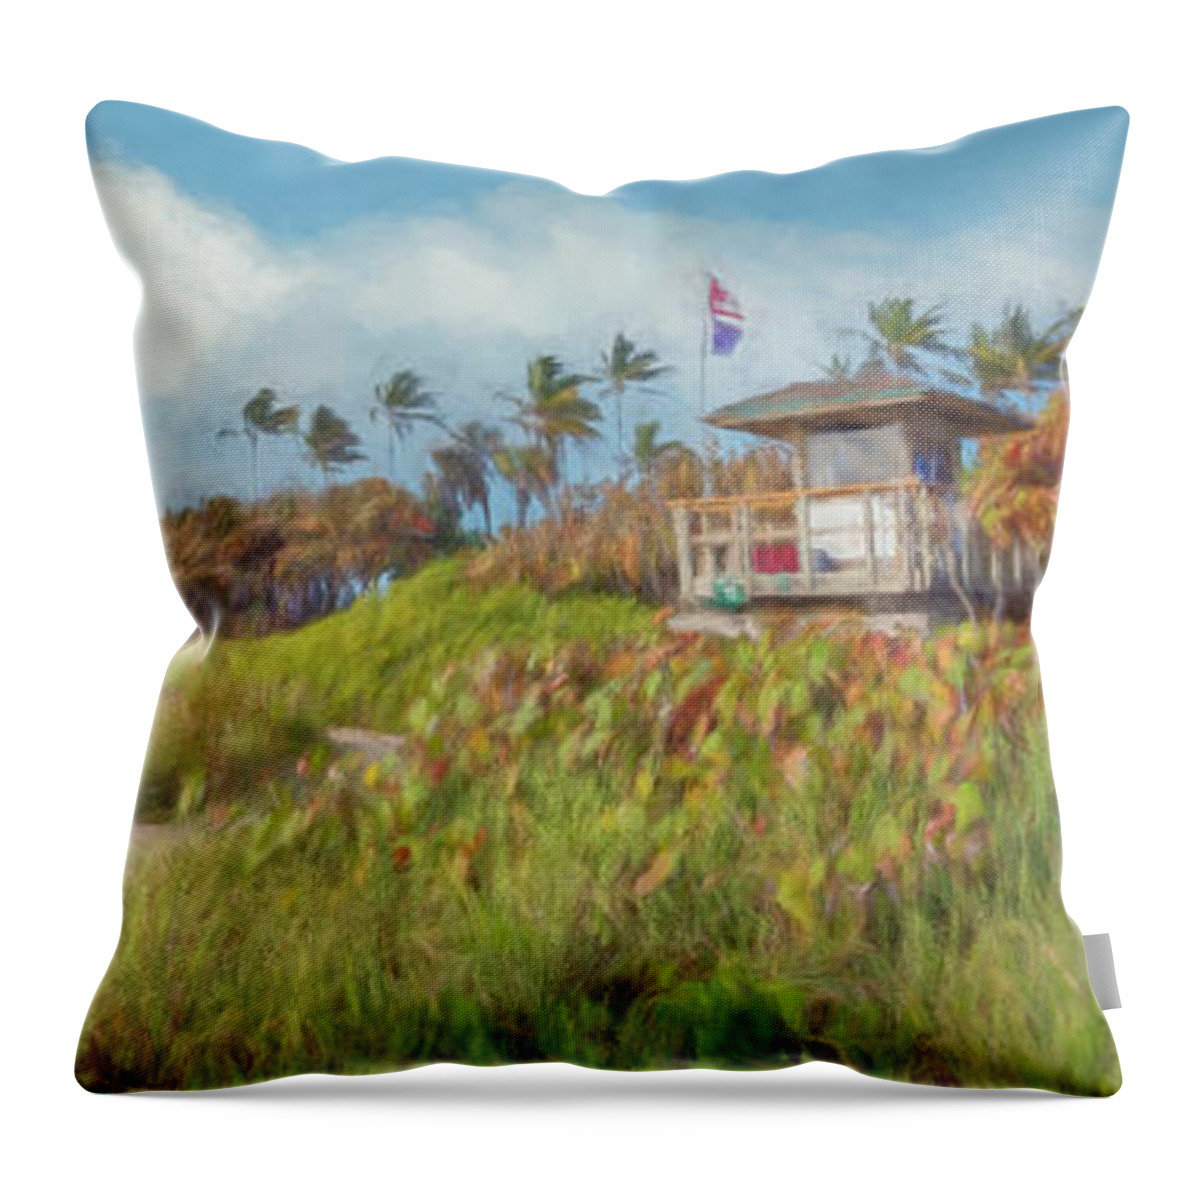 Clouds Throw Pillow featuring the photograph Lifeguard Stand in the Dunes Panorama Watercolors Painting by Debra and Dave Vanderlaan